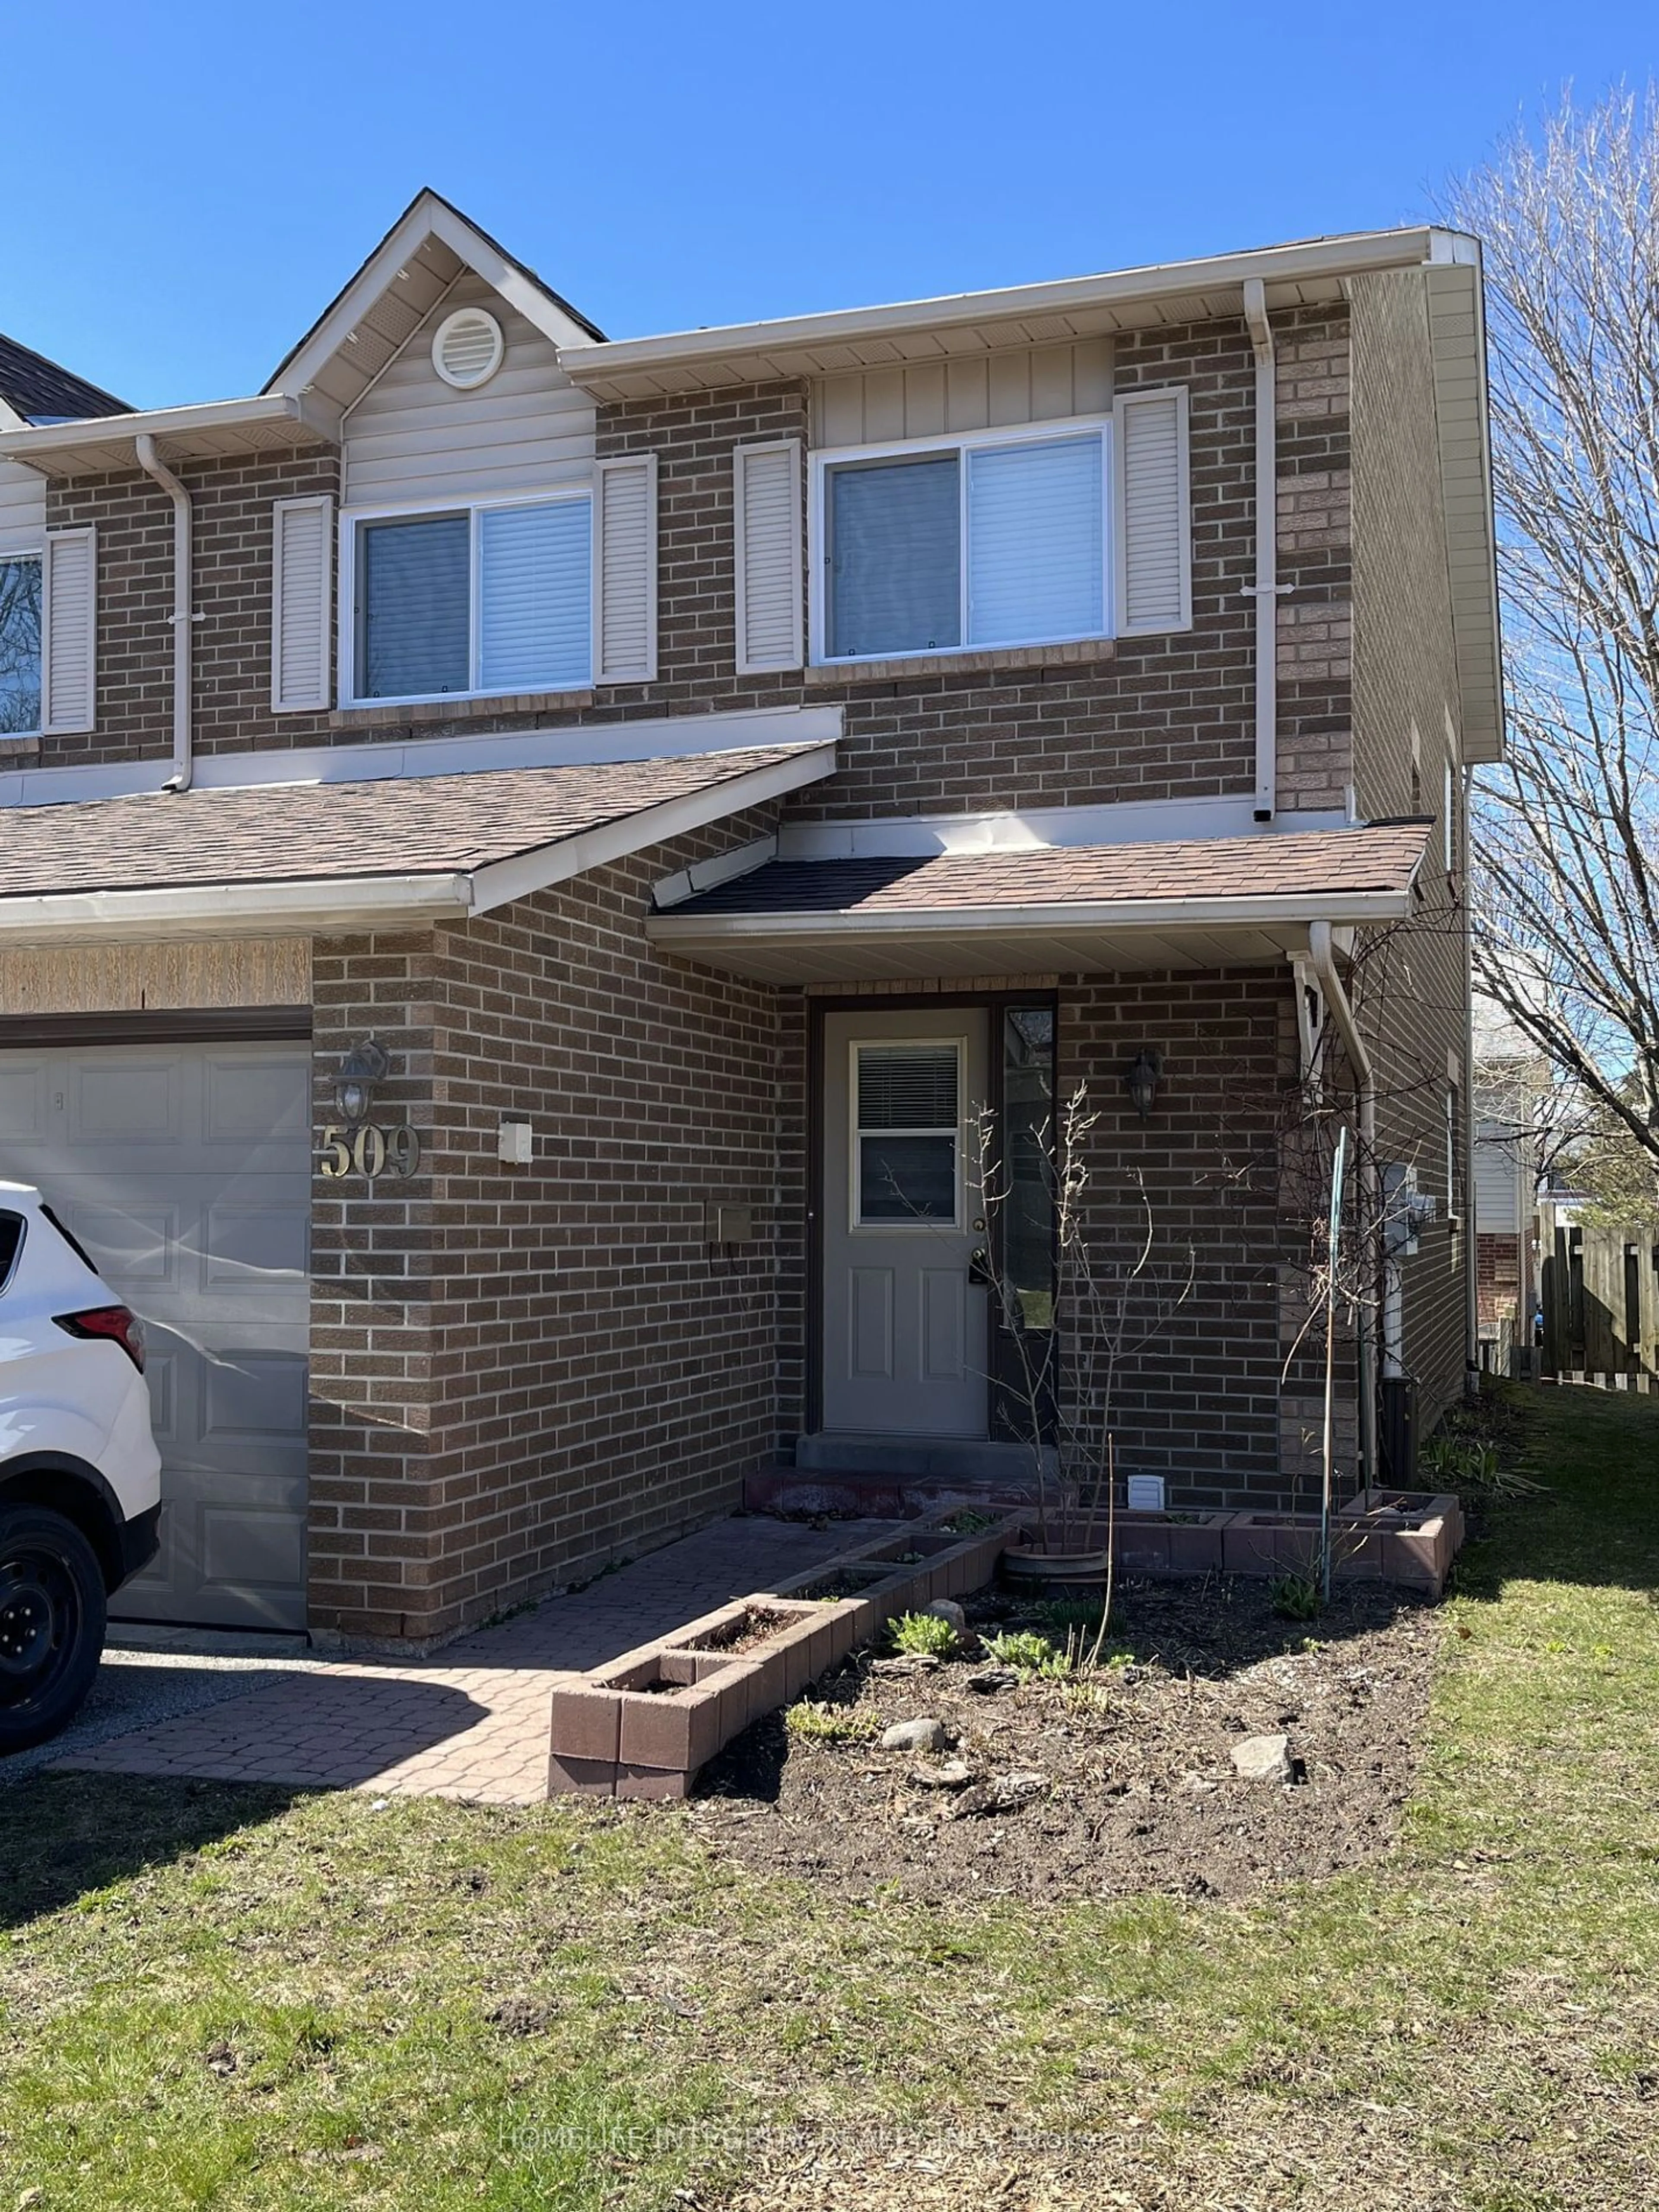 Home with brick exterior material for 509 Jack Giles Circ #22, Newmarket Ontario L3X 1X8